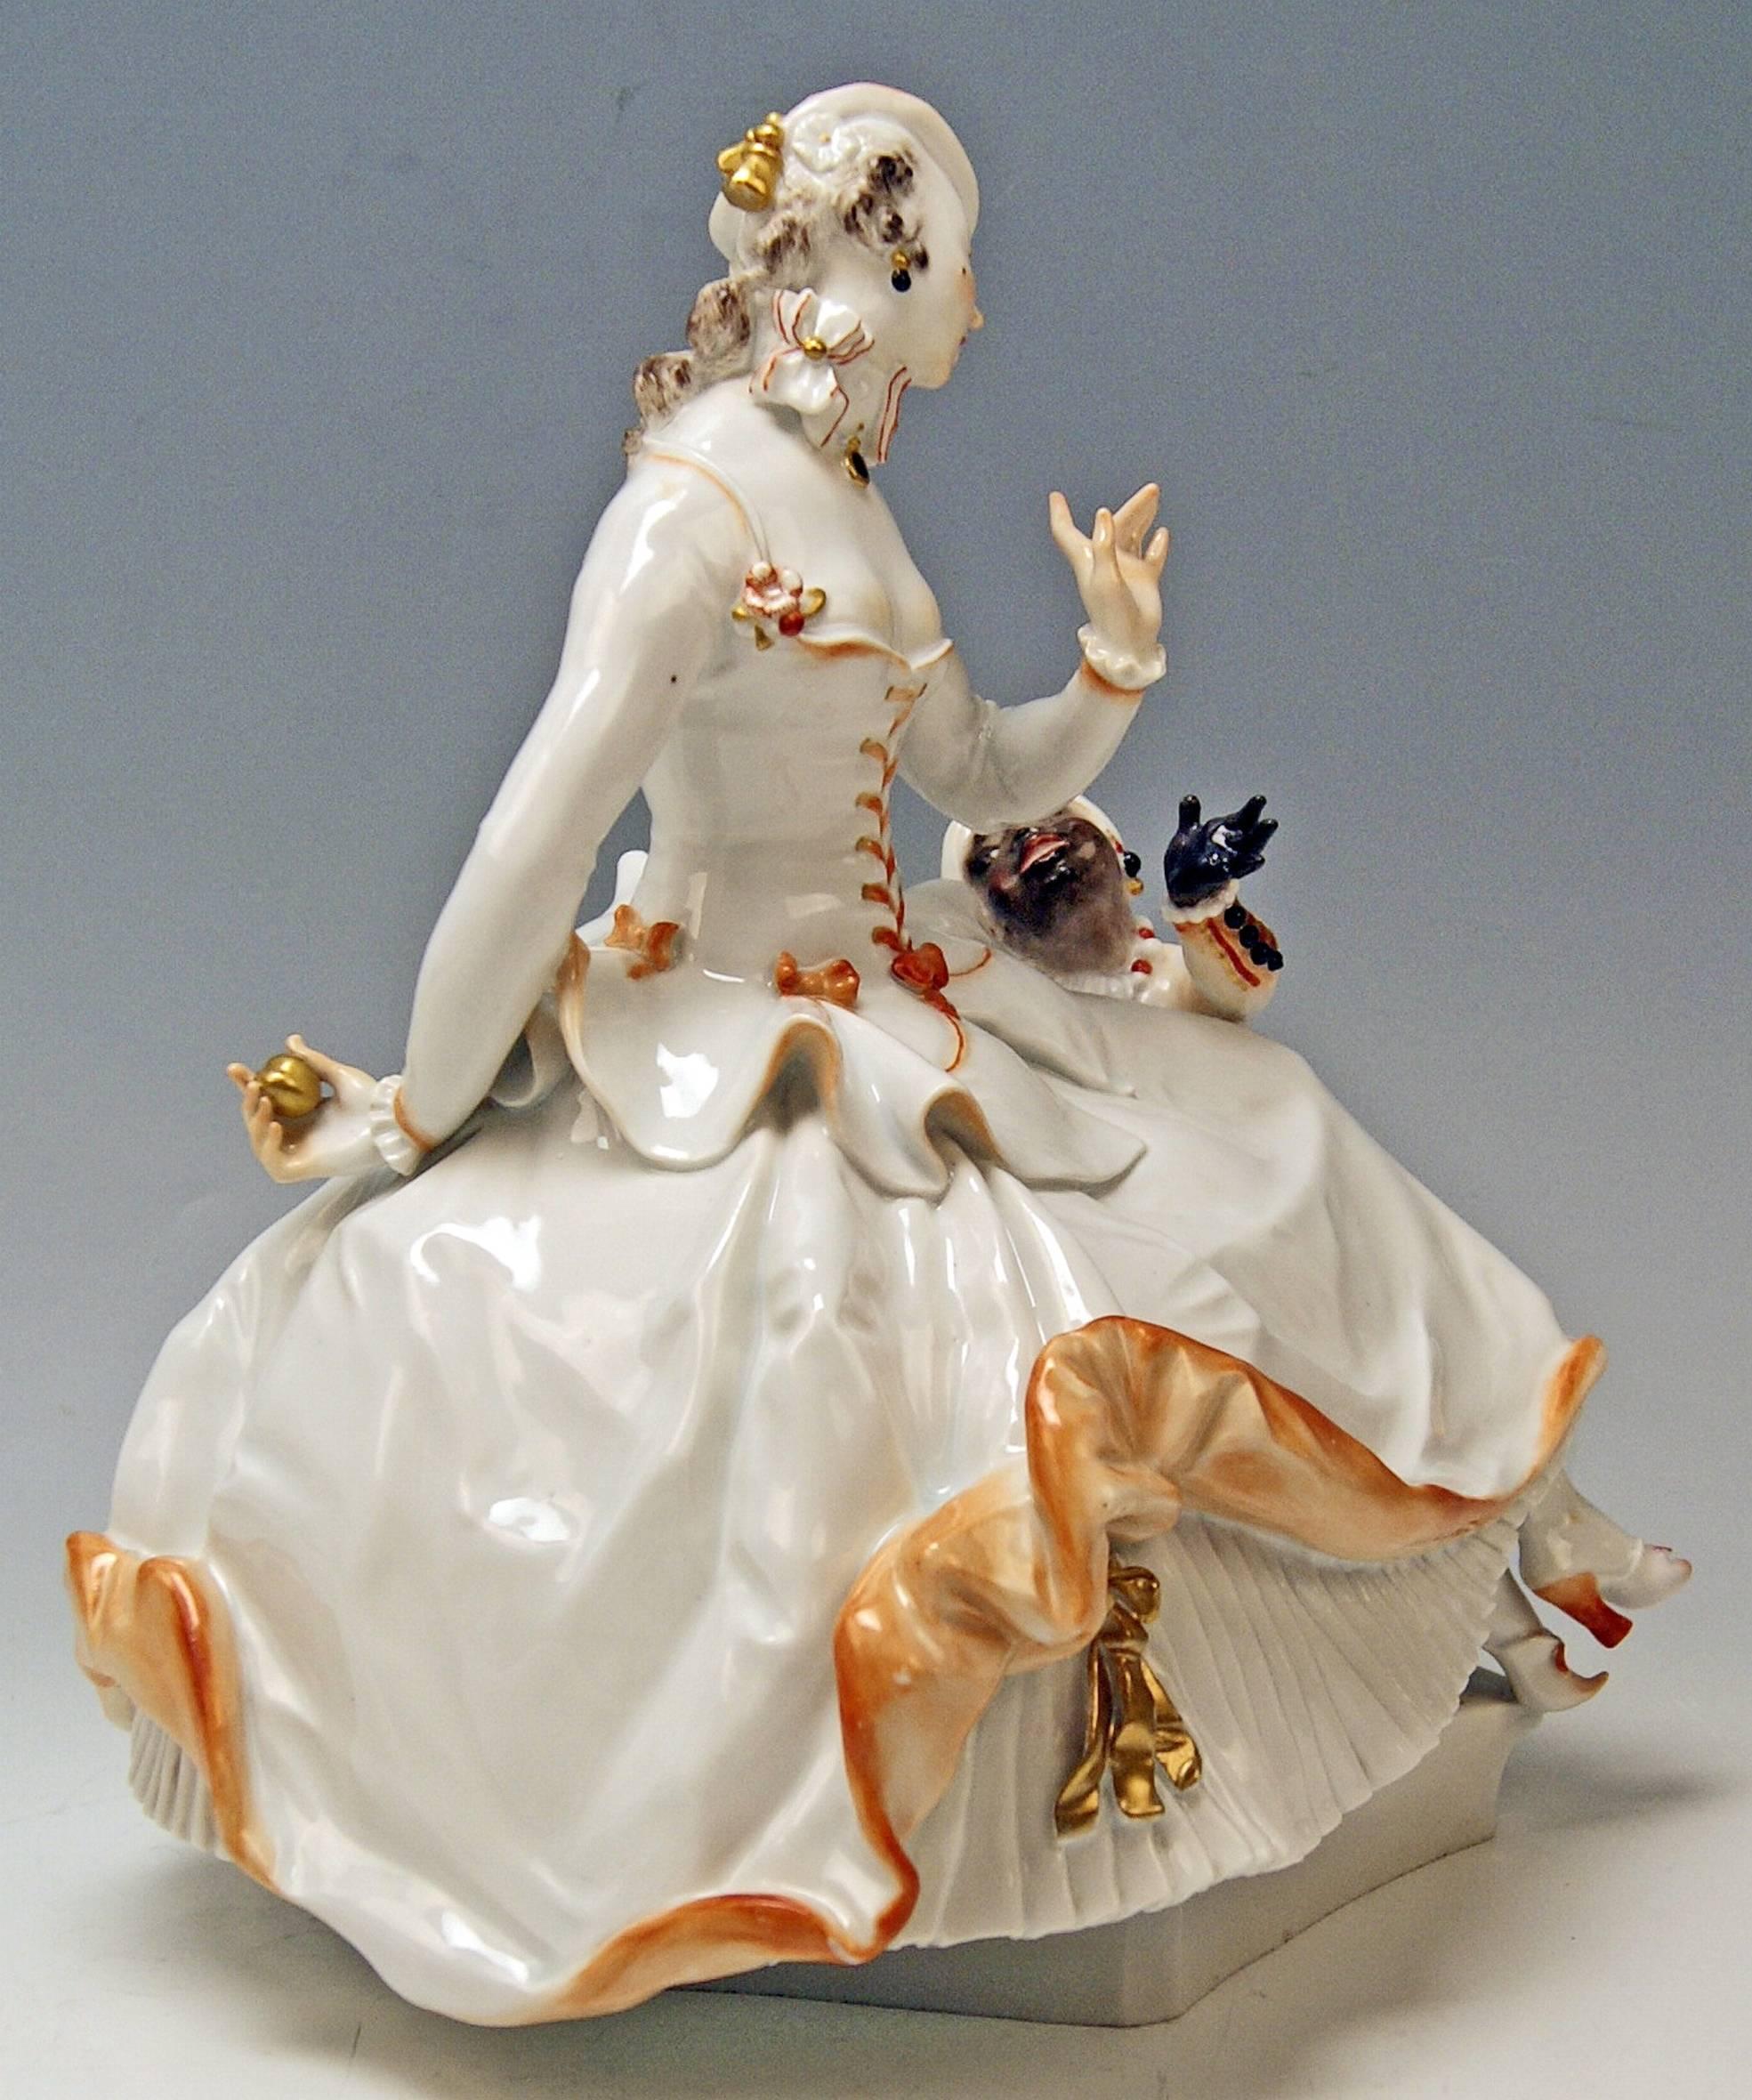 Painted Meissen Figurine Group Lady and Black Boy by Paul Scheurich made c.1920-21